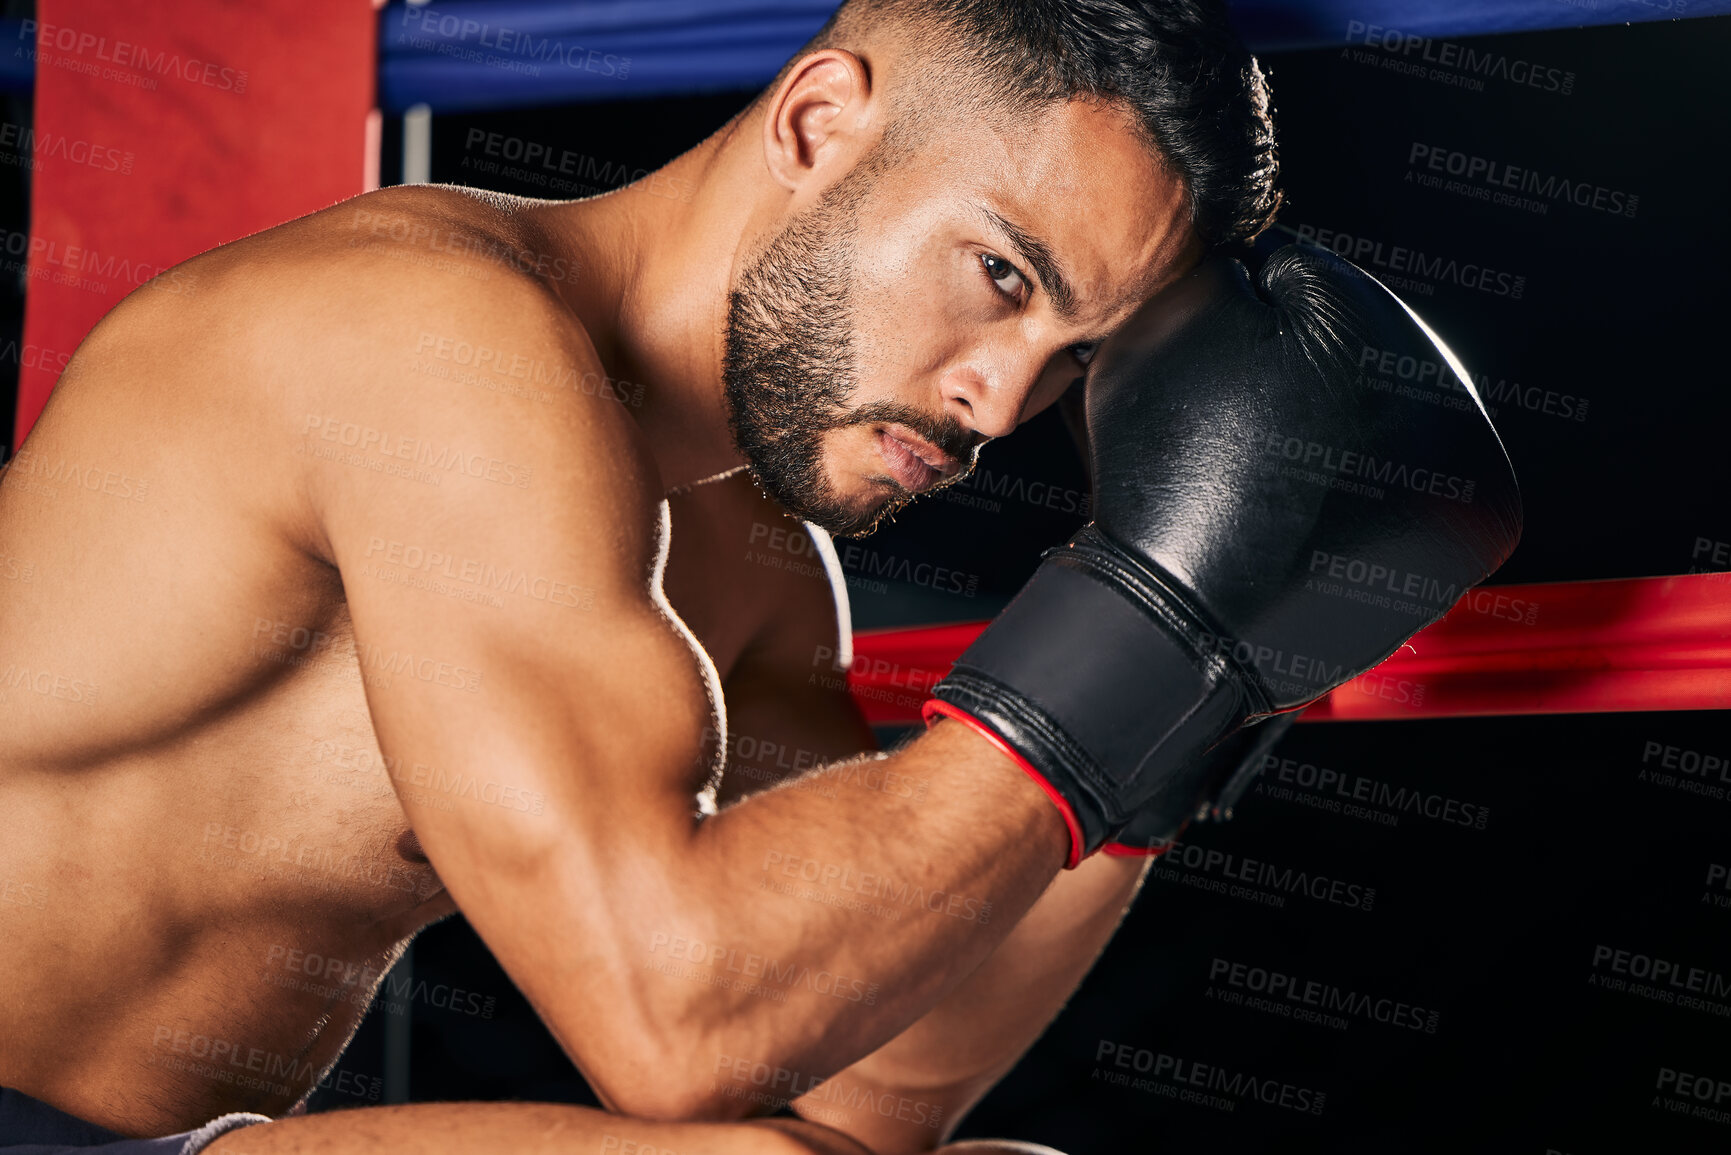 Buy stock photo Motivation, sport and boxer man focus of a sports athlete in a boxing ring ready for a match. Competitive, exercise and fitness workout portrait of a male from Guatemala in fight health training